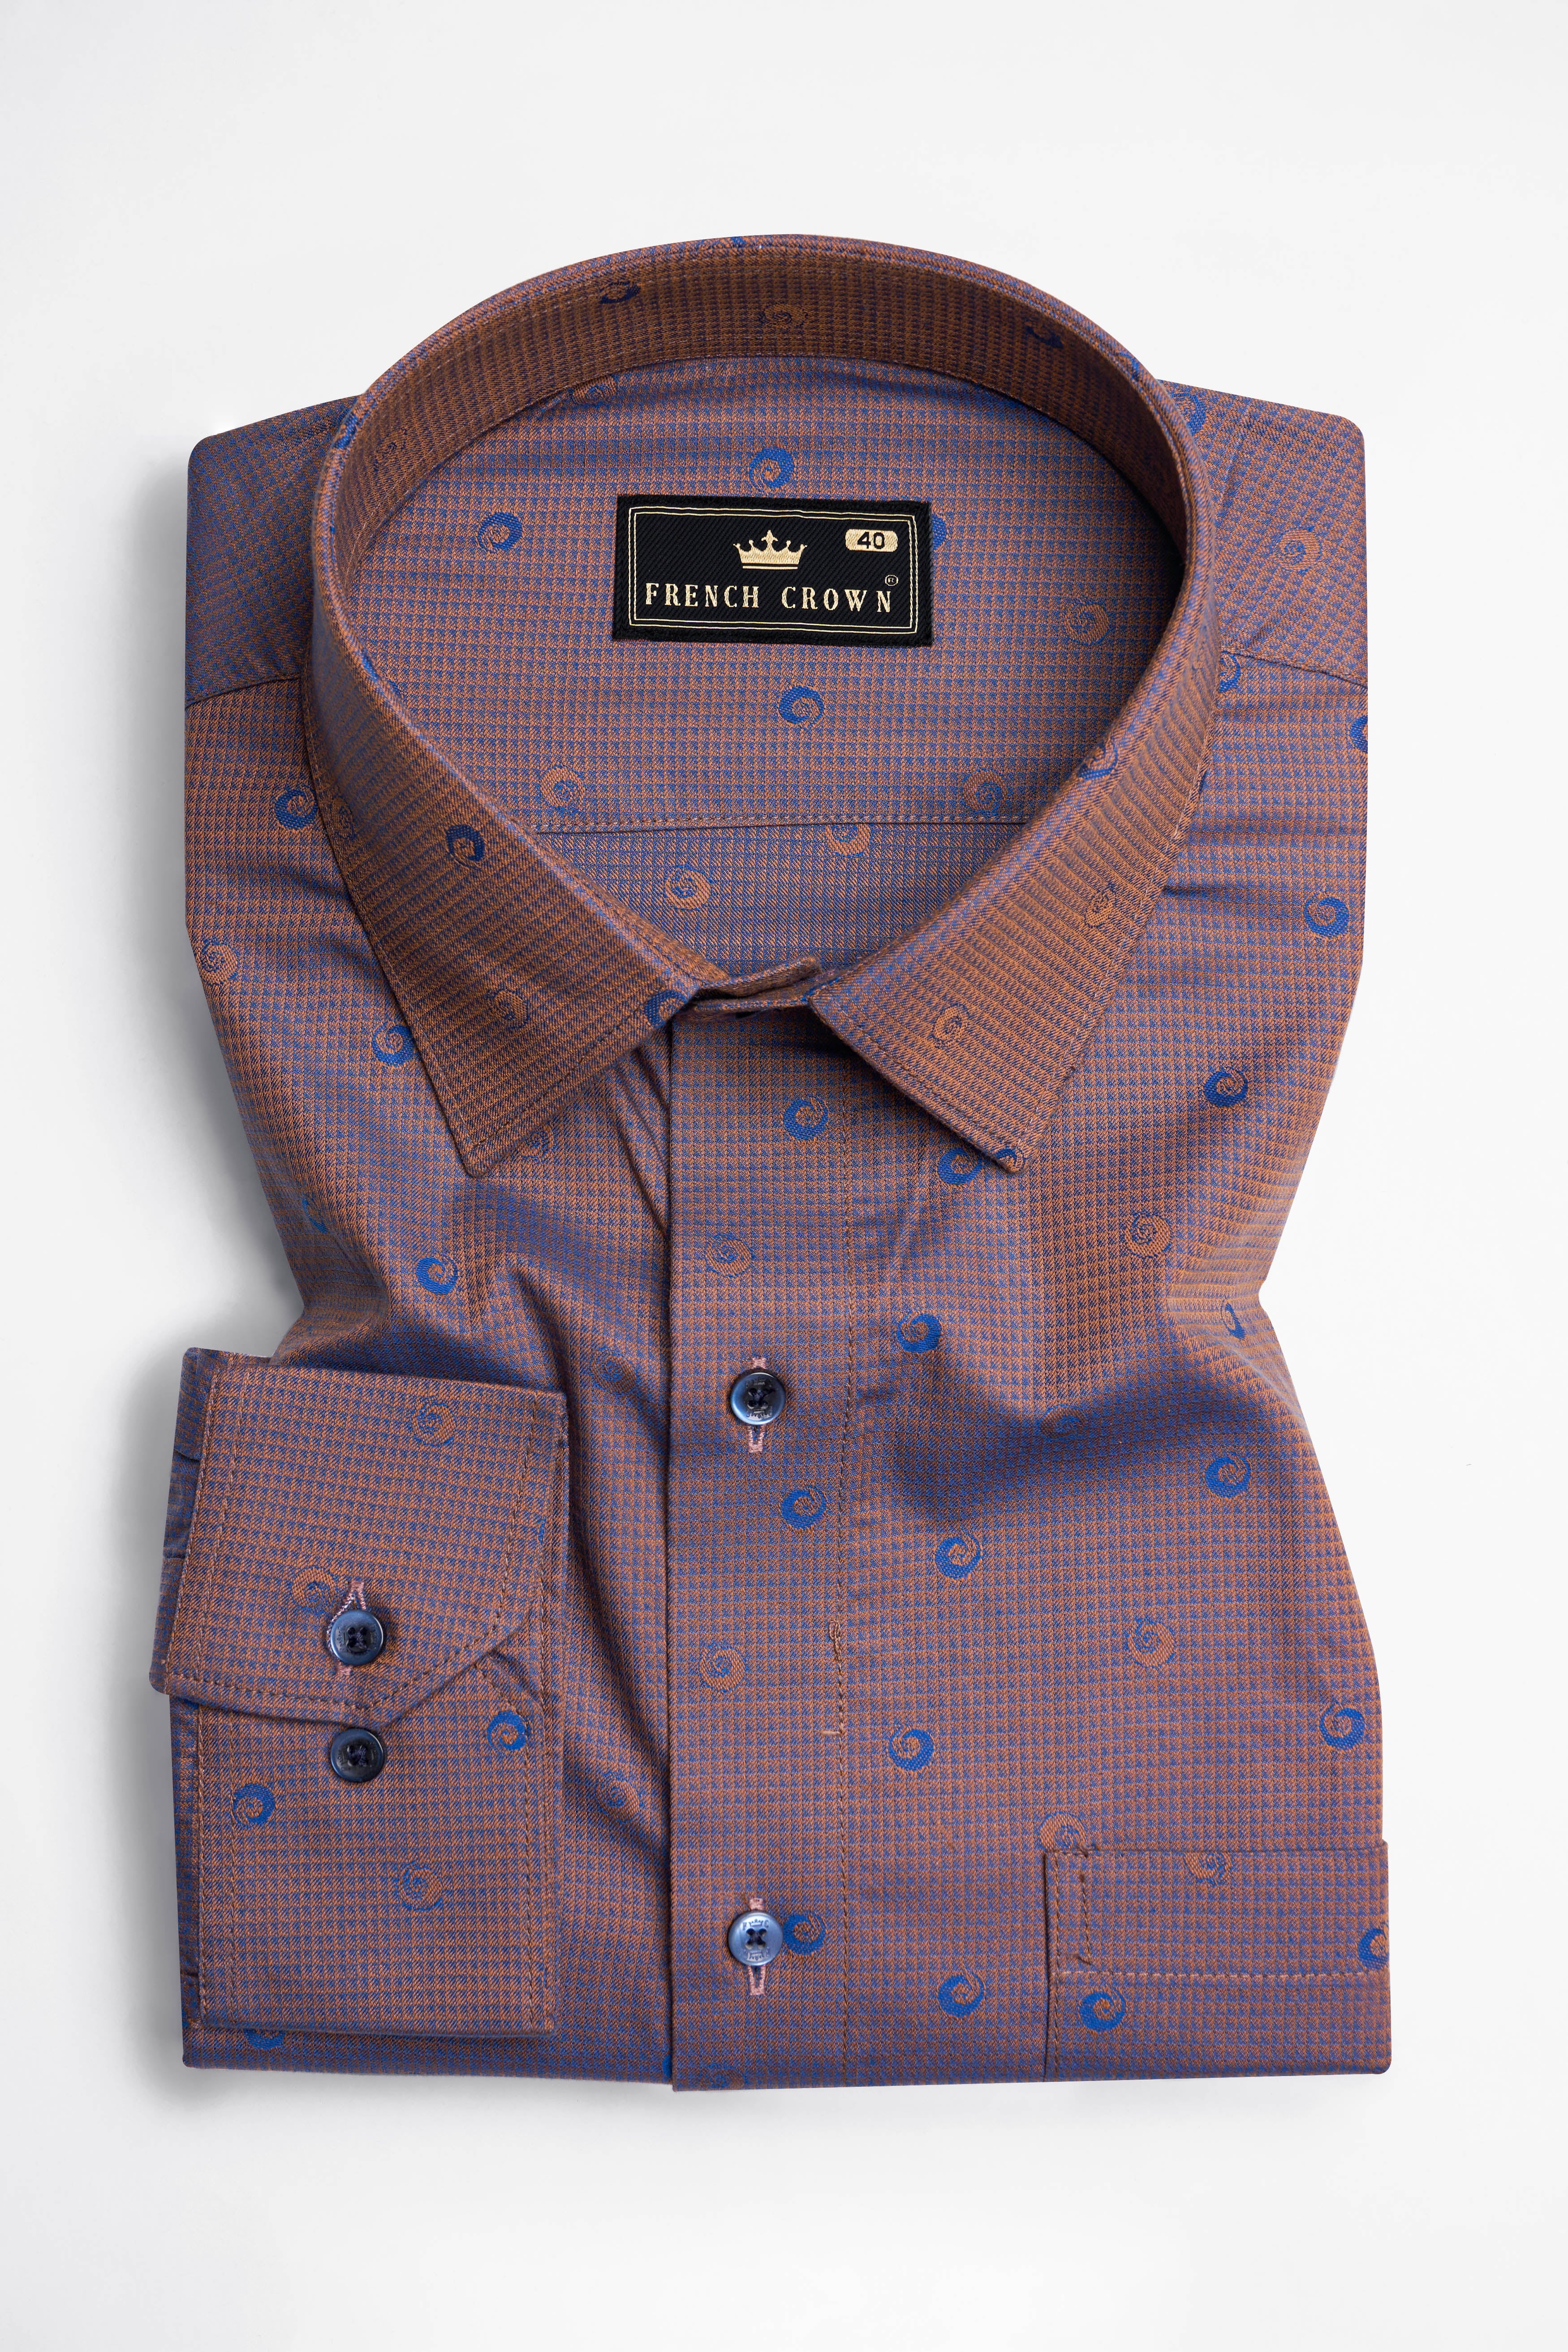 Spicy Mix Brown and Chambray Blue Jacquard Textured Premium Giza Cotton Shirt